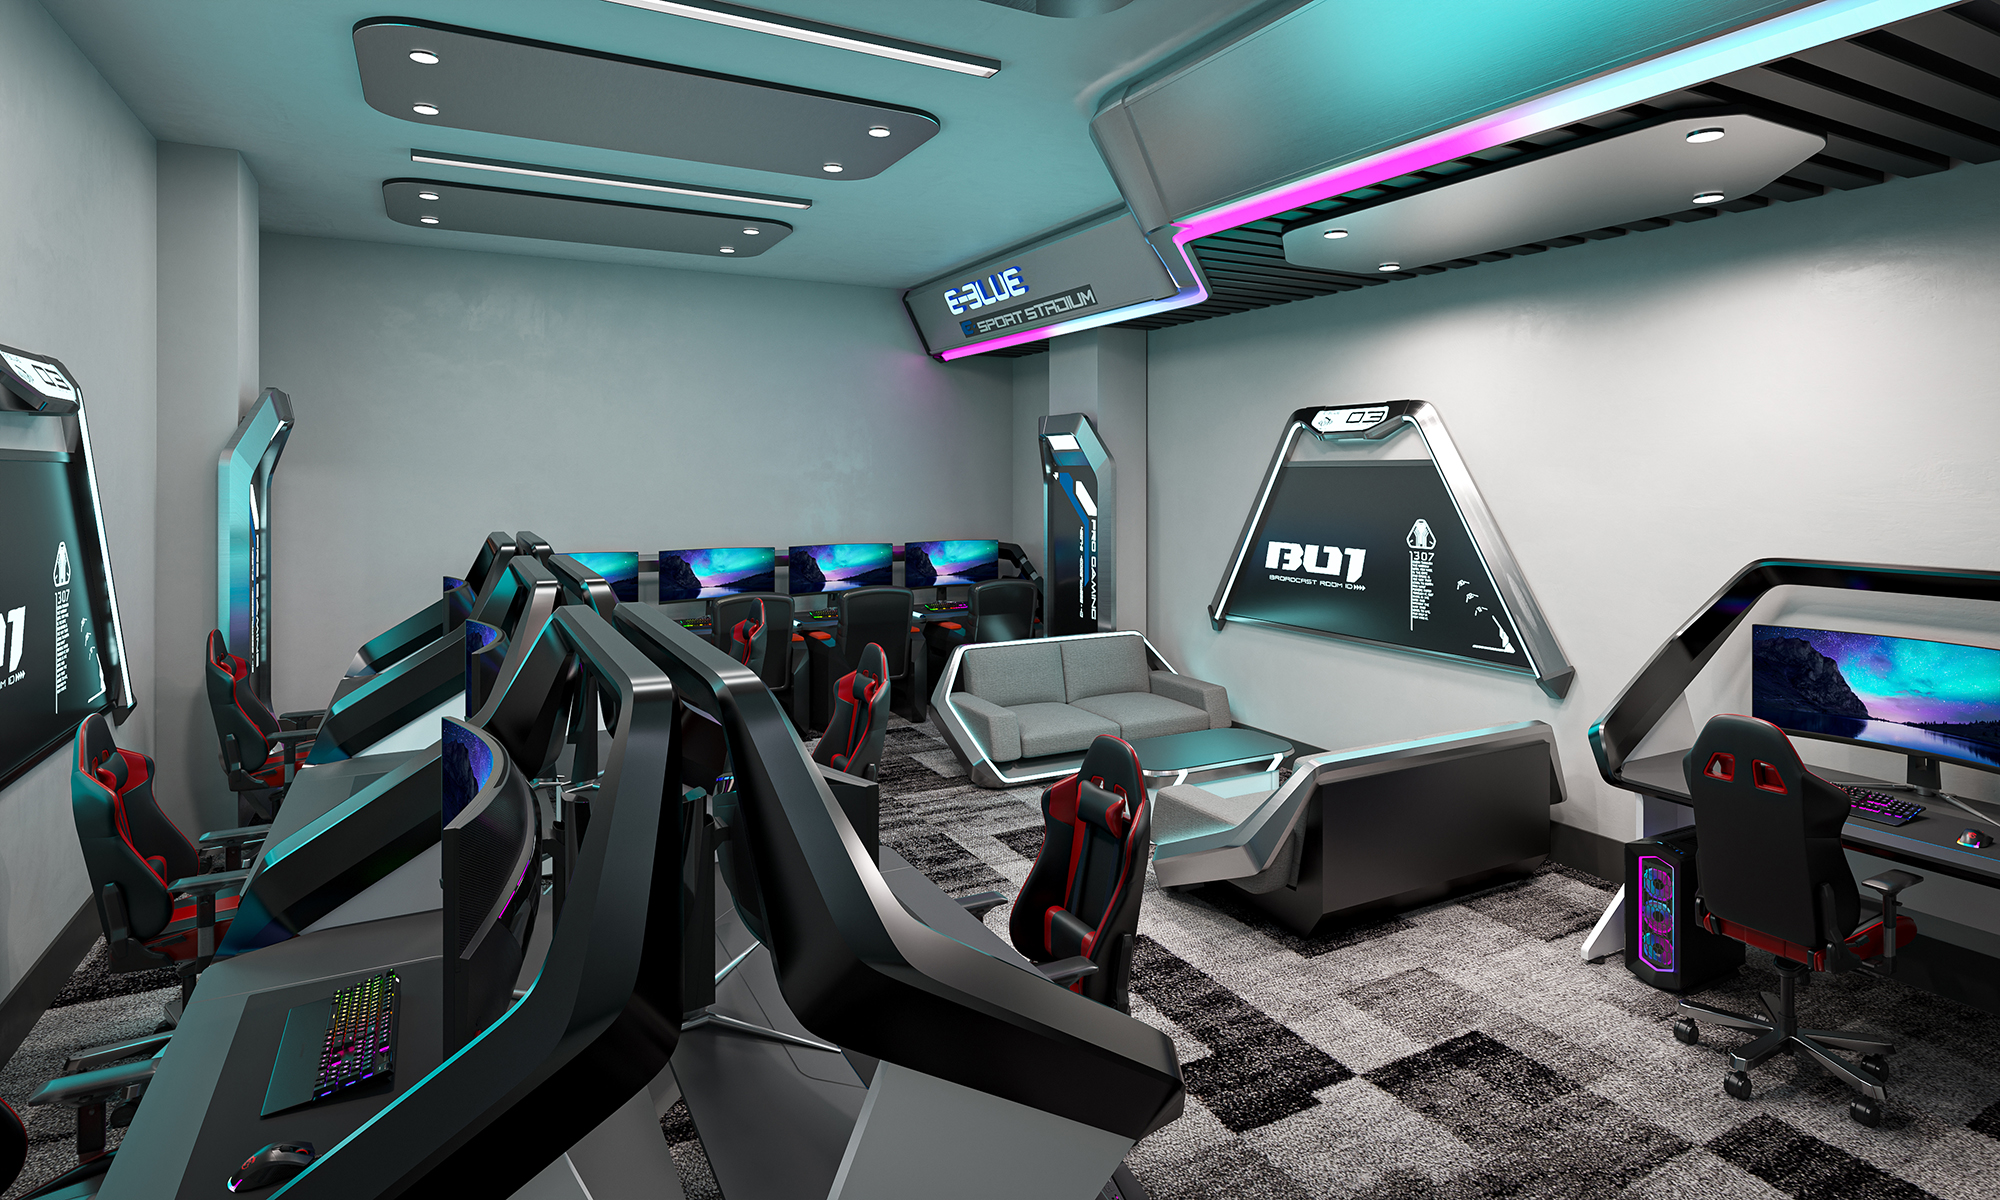 Esports lounge with gray walls and blue and purple neon lights. Individual gaming stations with gaming chairs and computer screens.